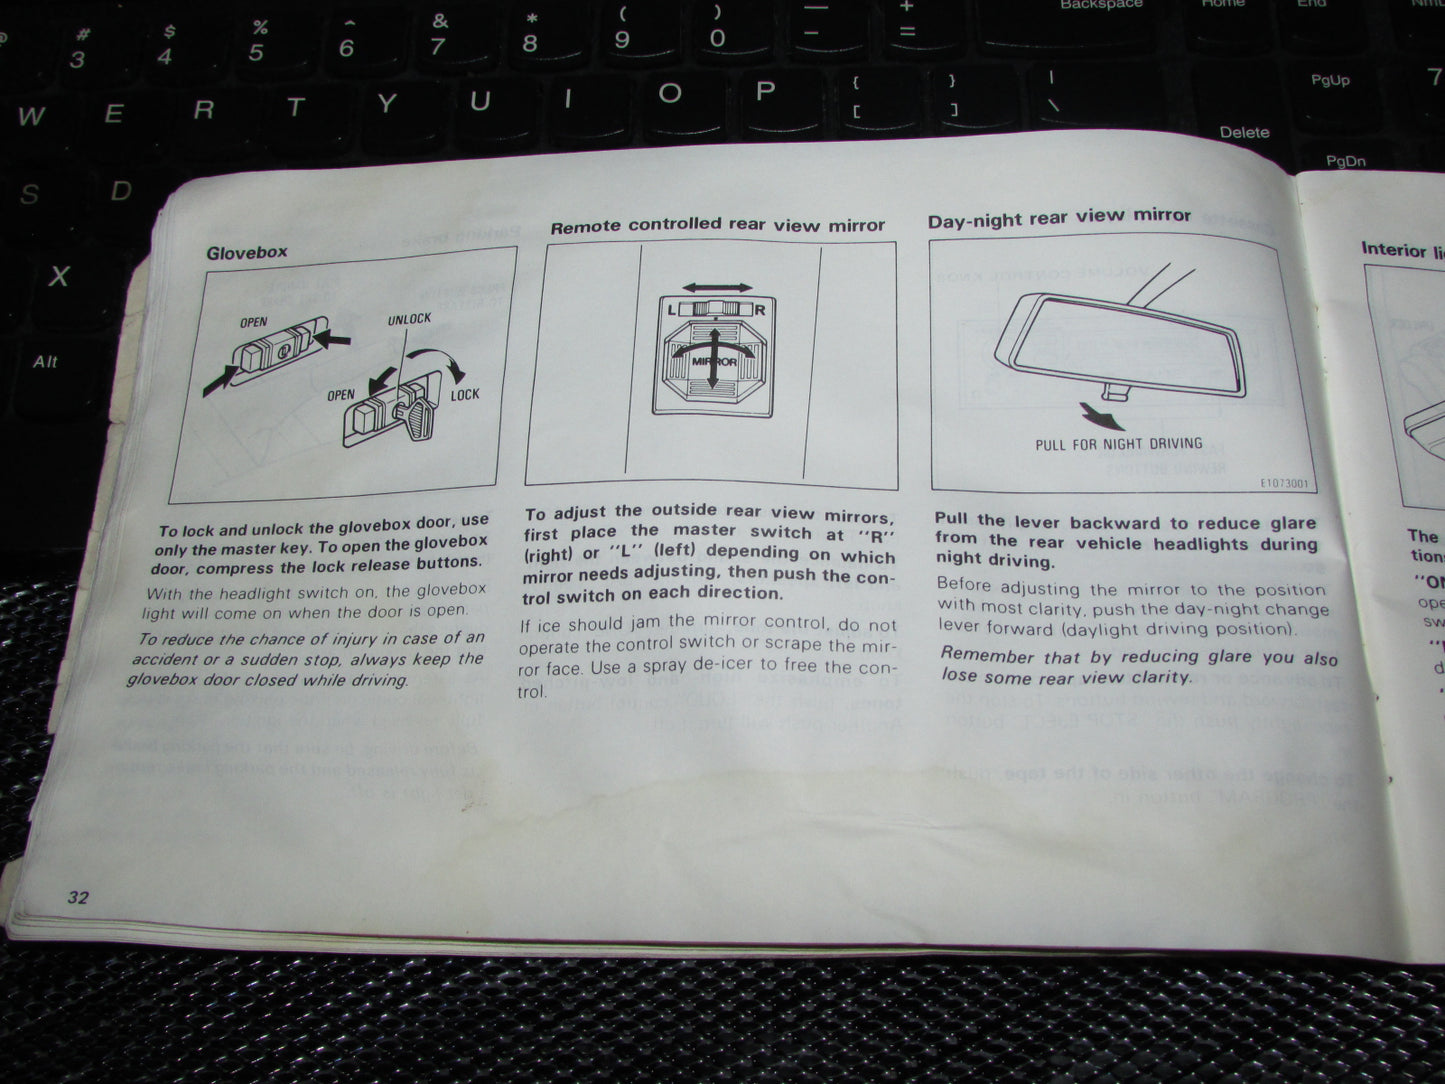 Toyota Celica (1982) Owners Manual